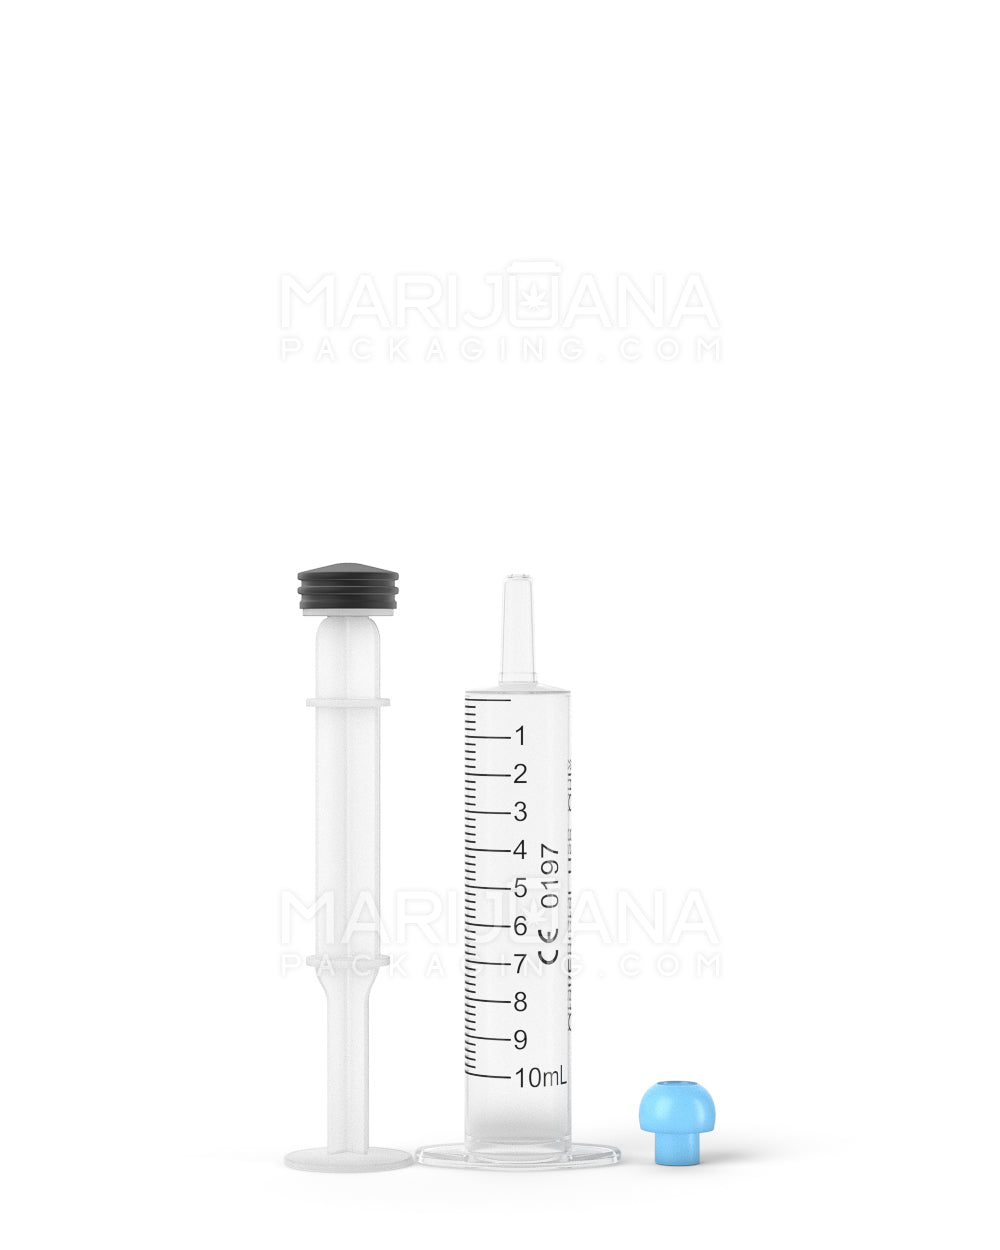 Plastic Oral Concentrate Syringes | 10mL - 1mL Increments - 100 Count - 3